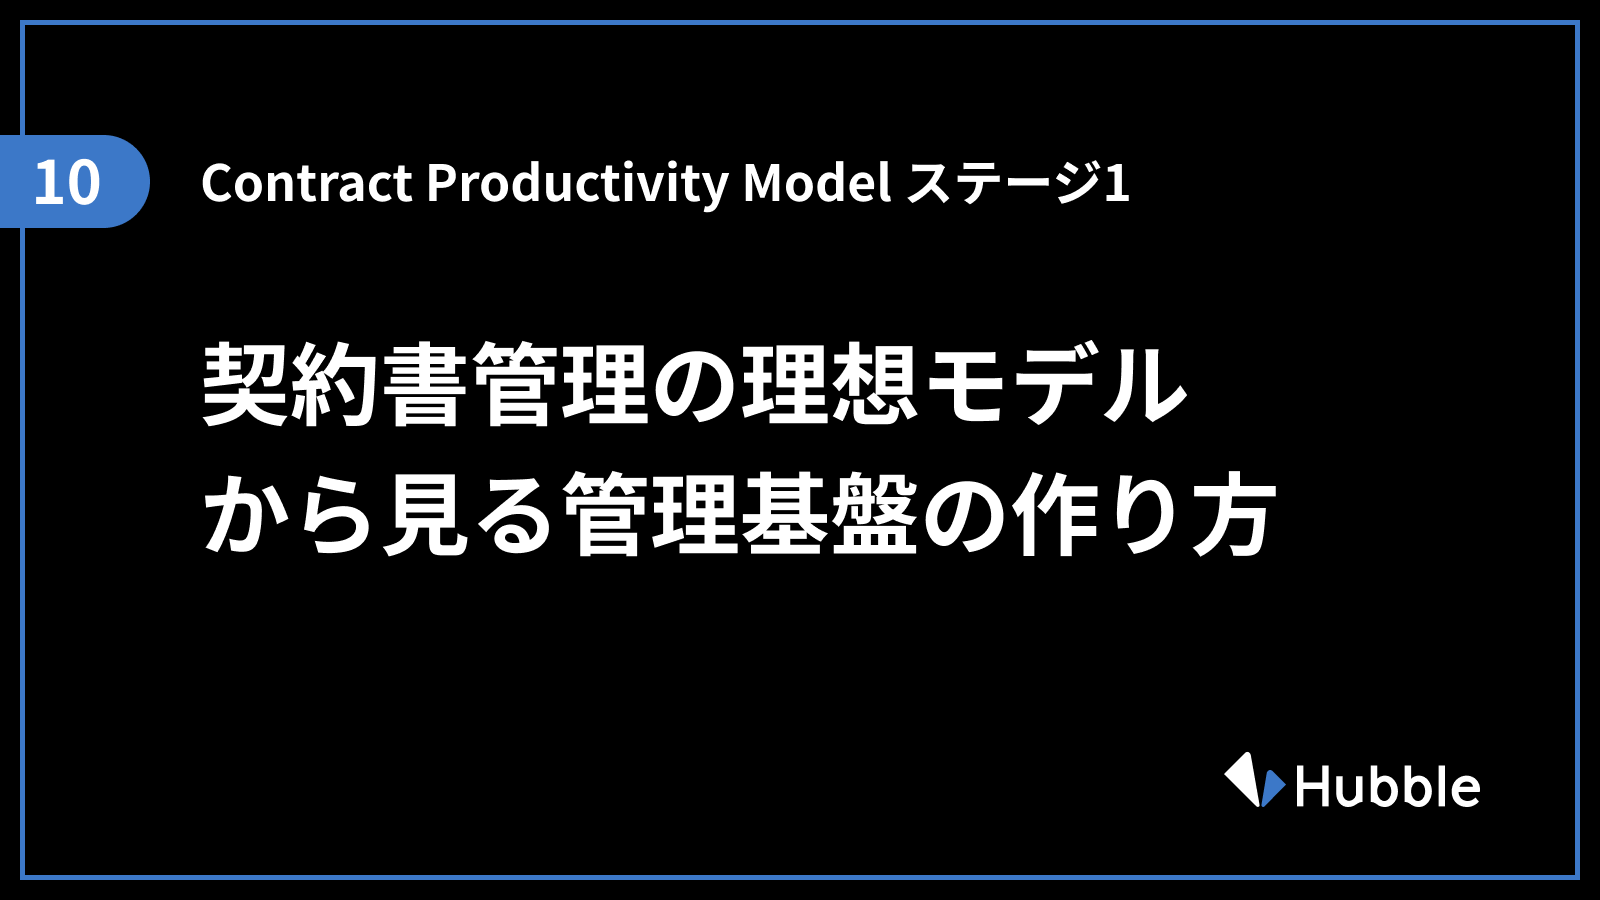 Contract Productivity Model